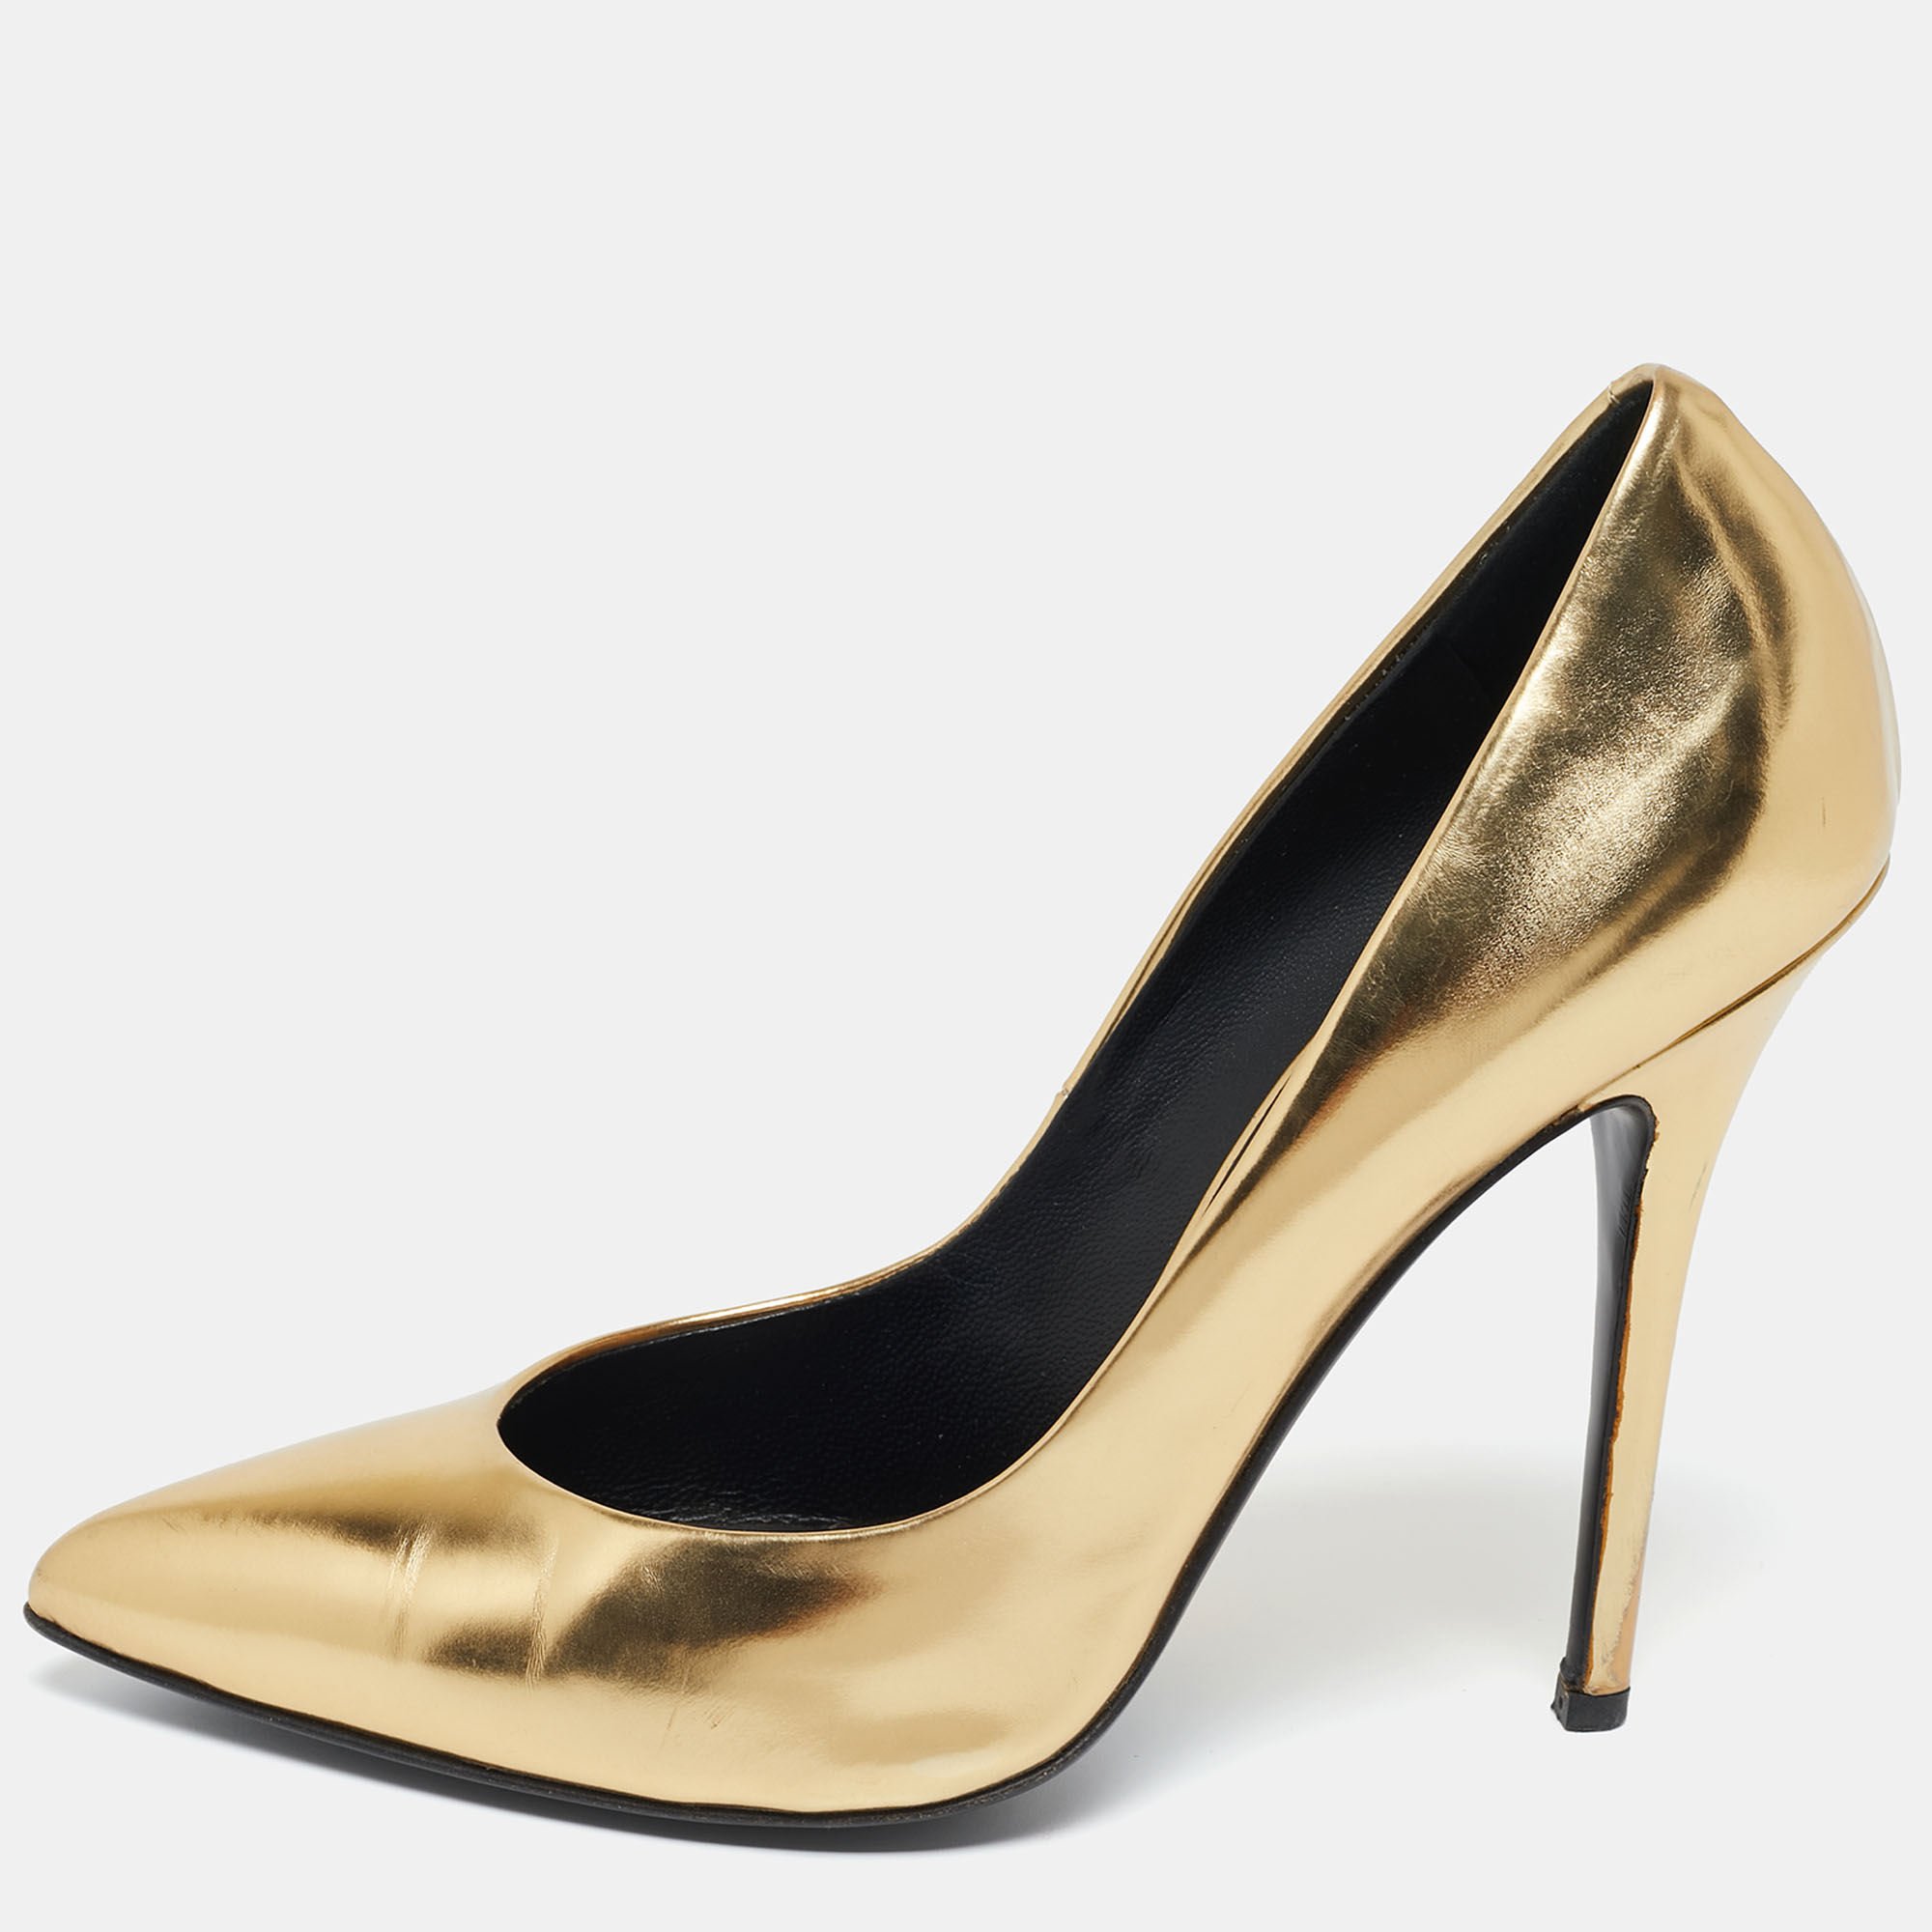 There are some shoes that stand the test of time and fashion cycles these timeless Giuseppe Zanotti pumps are the one. Crafted from leather in a gold shade they are designed with sleek cuts pointed toes and tall heels.